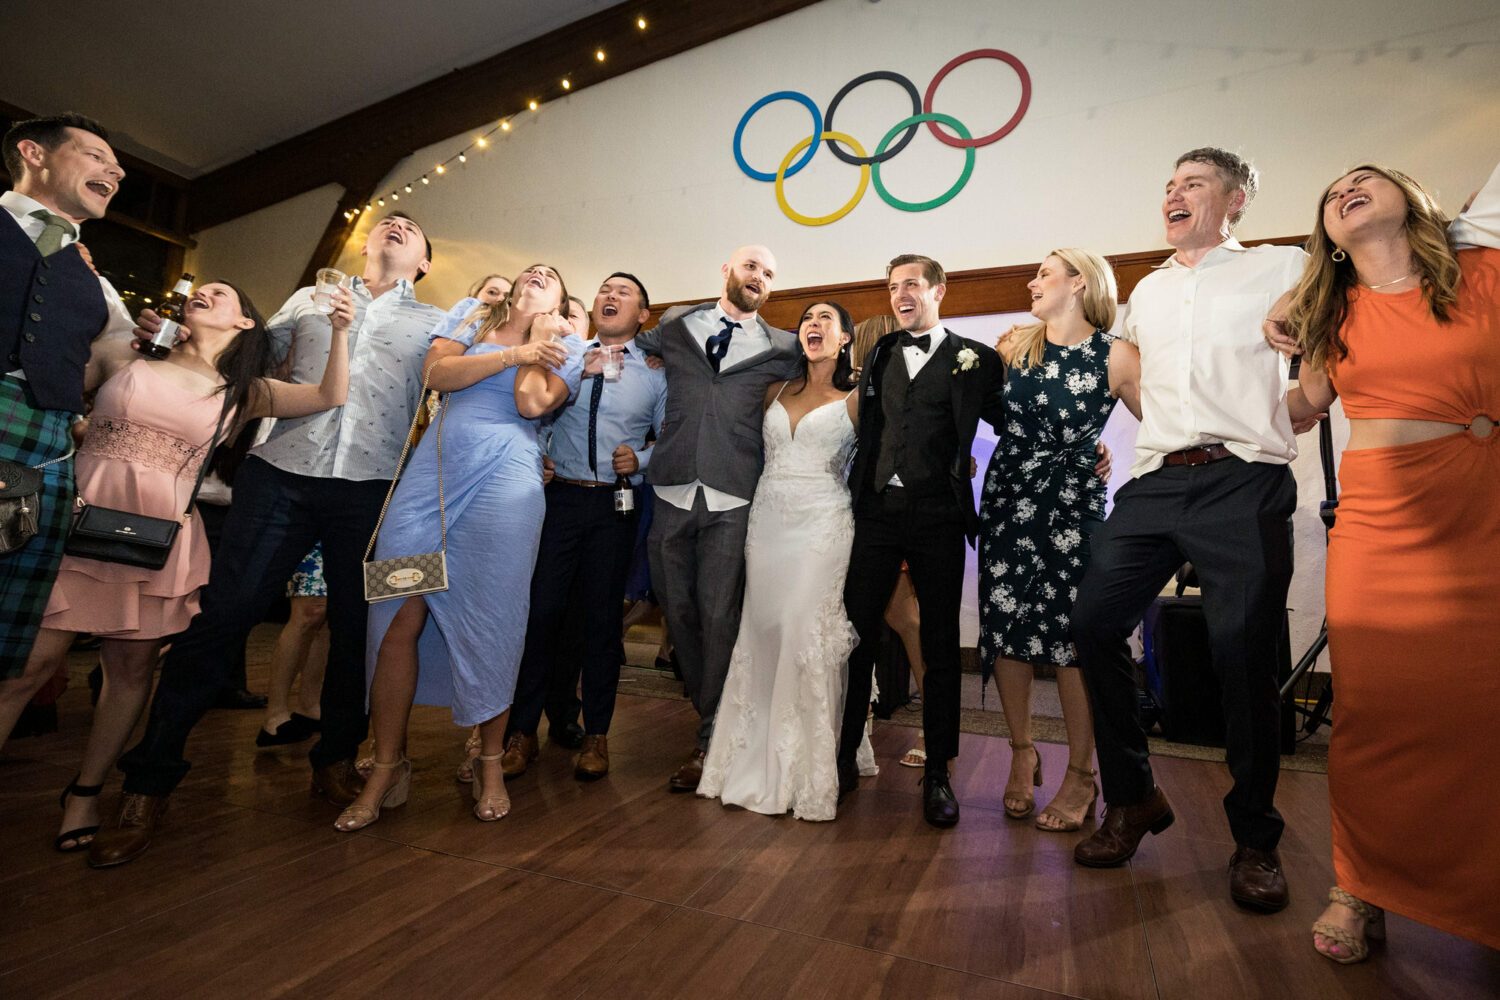 The dance floor at a Palisades wedding can be in front of the Olympic rings.